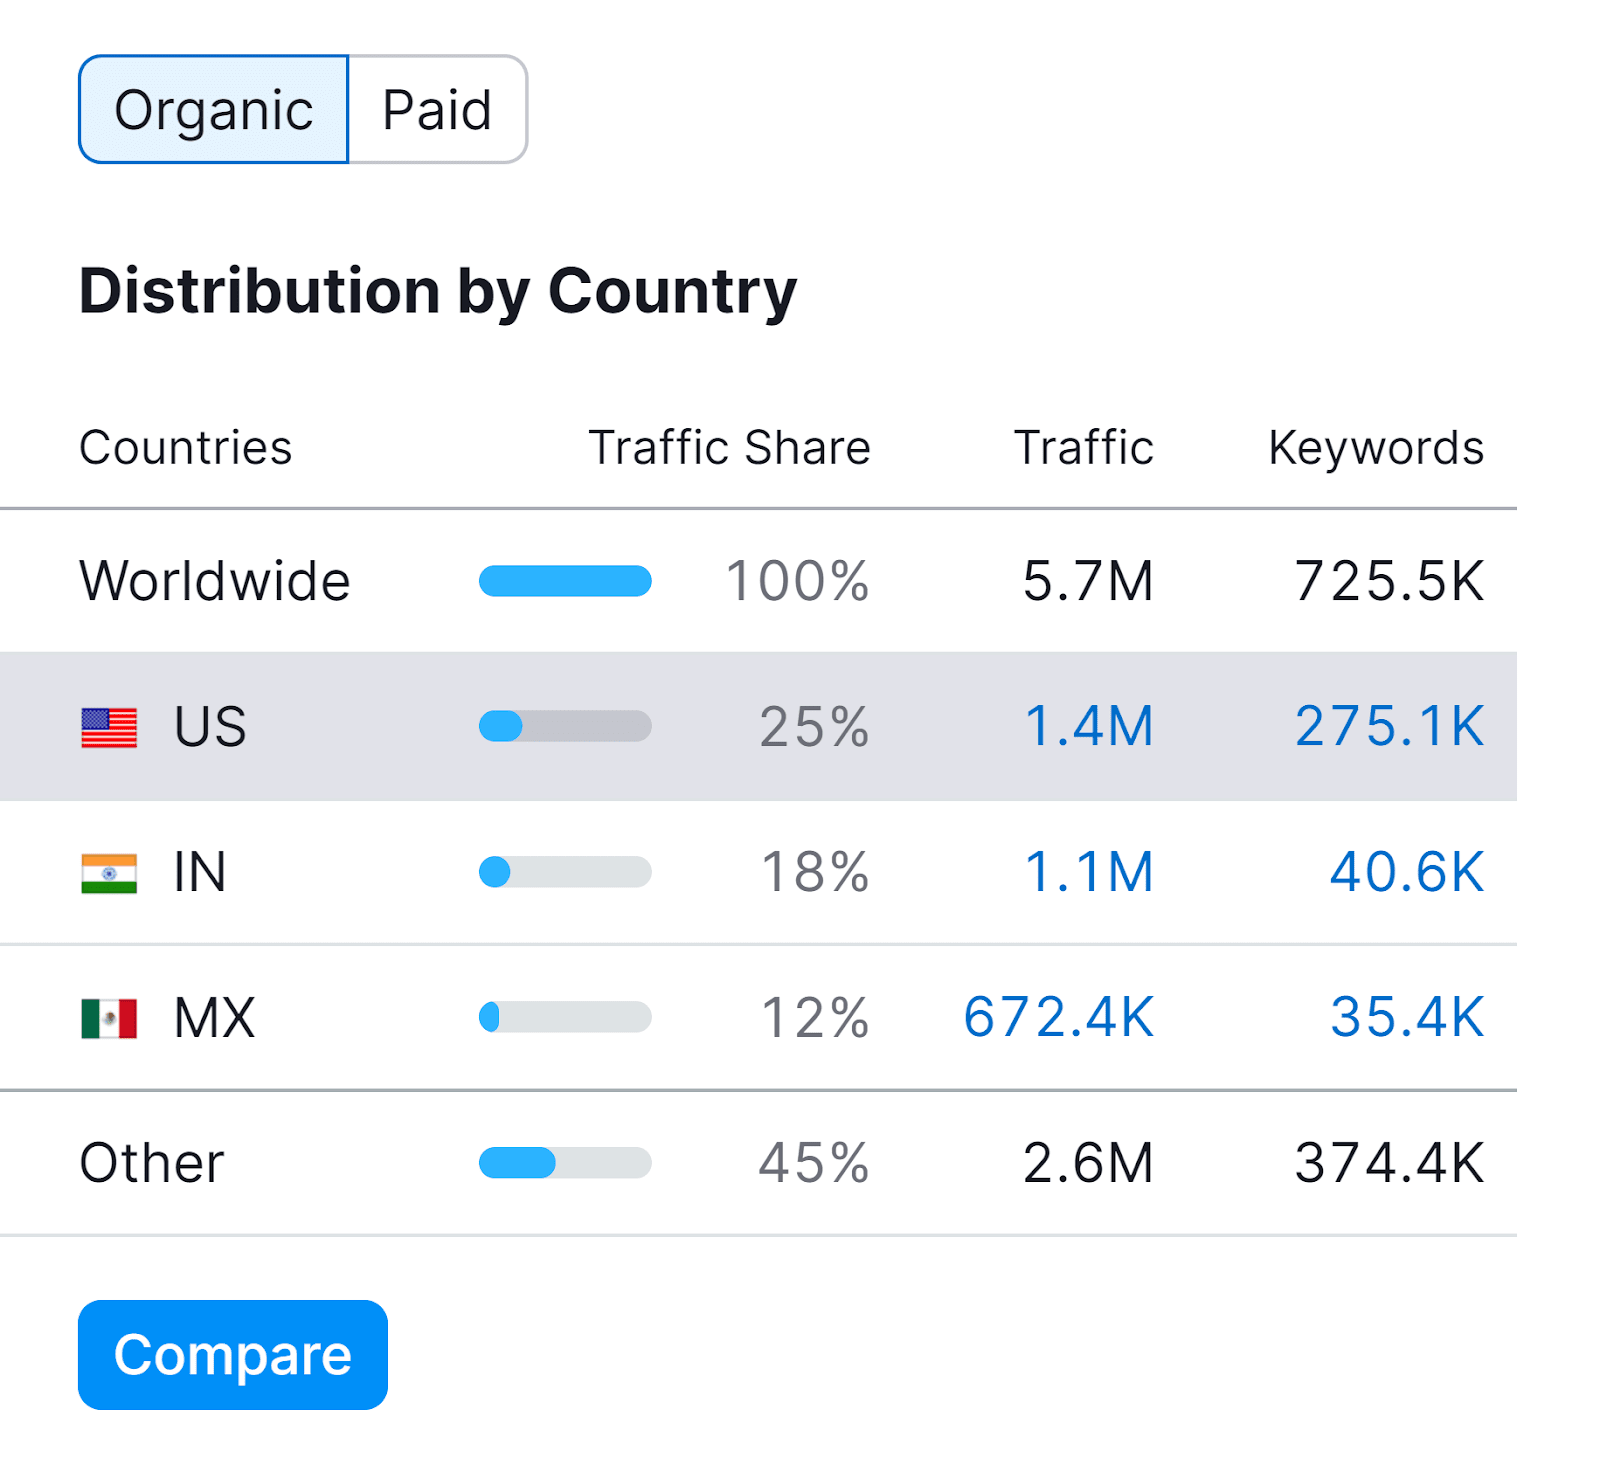 Distribution of organic traffic by country in Semrush Domain Overview tool